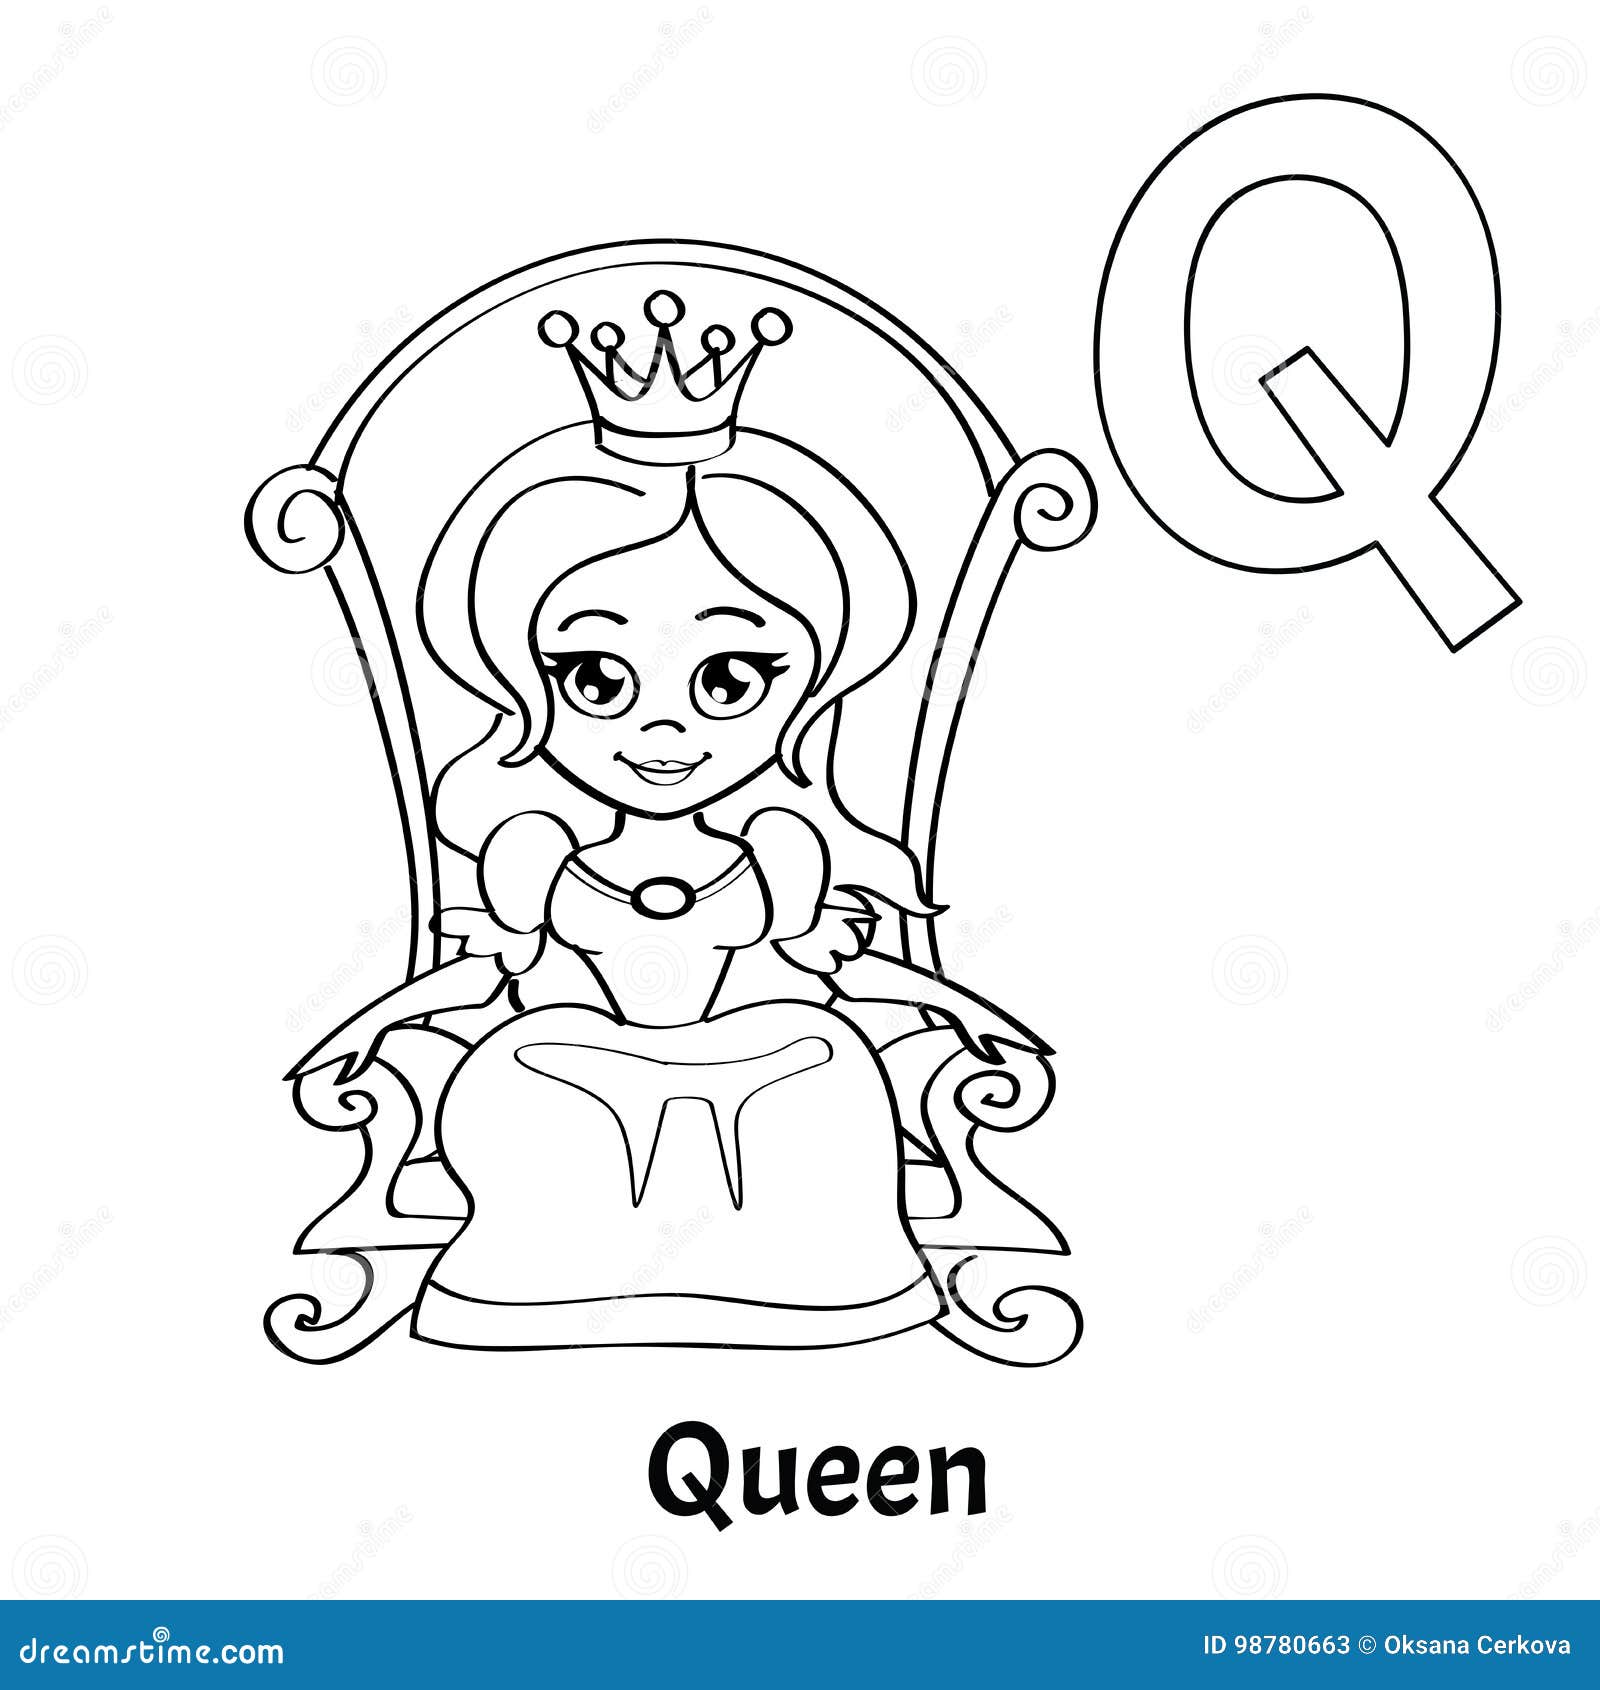 vector alphabet letter q coloring page queen stock vector illustration of cartoon kids 98780663